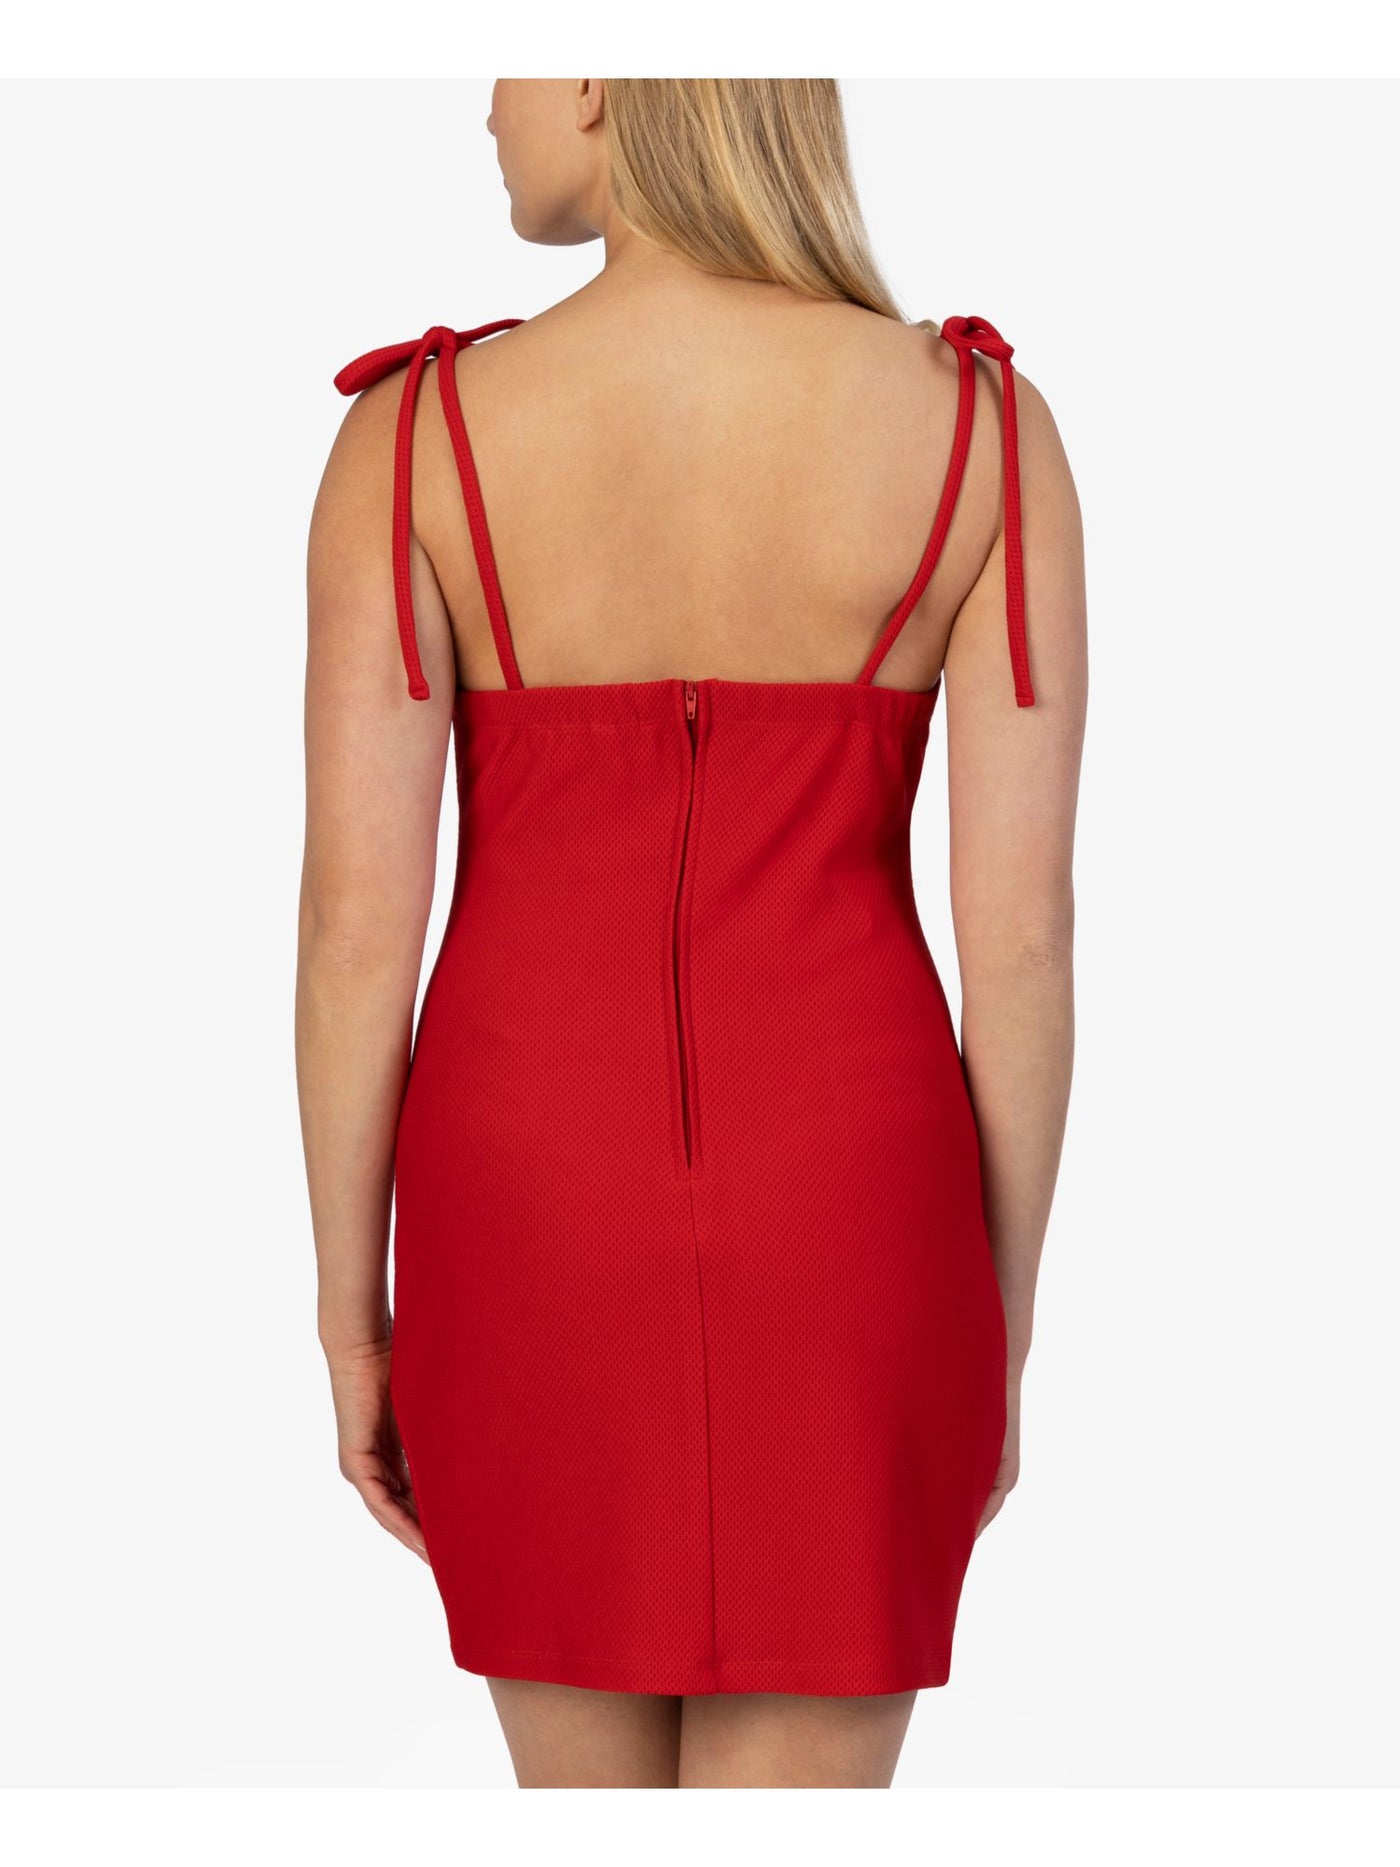 SPEECHLESS Womens Red Stretch Zippered Textured Tie Fitted Spaghetti Strap Surplice Neckline Mini Party Body Con Dress Juniors XS